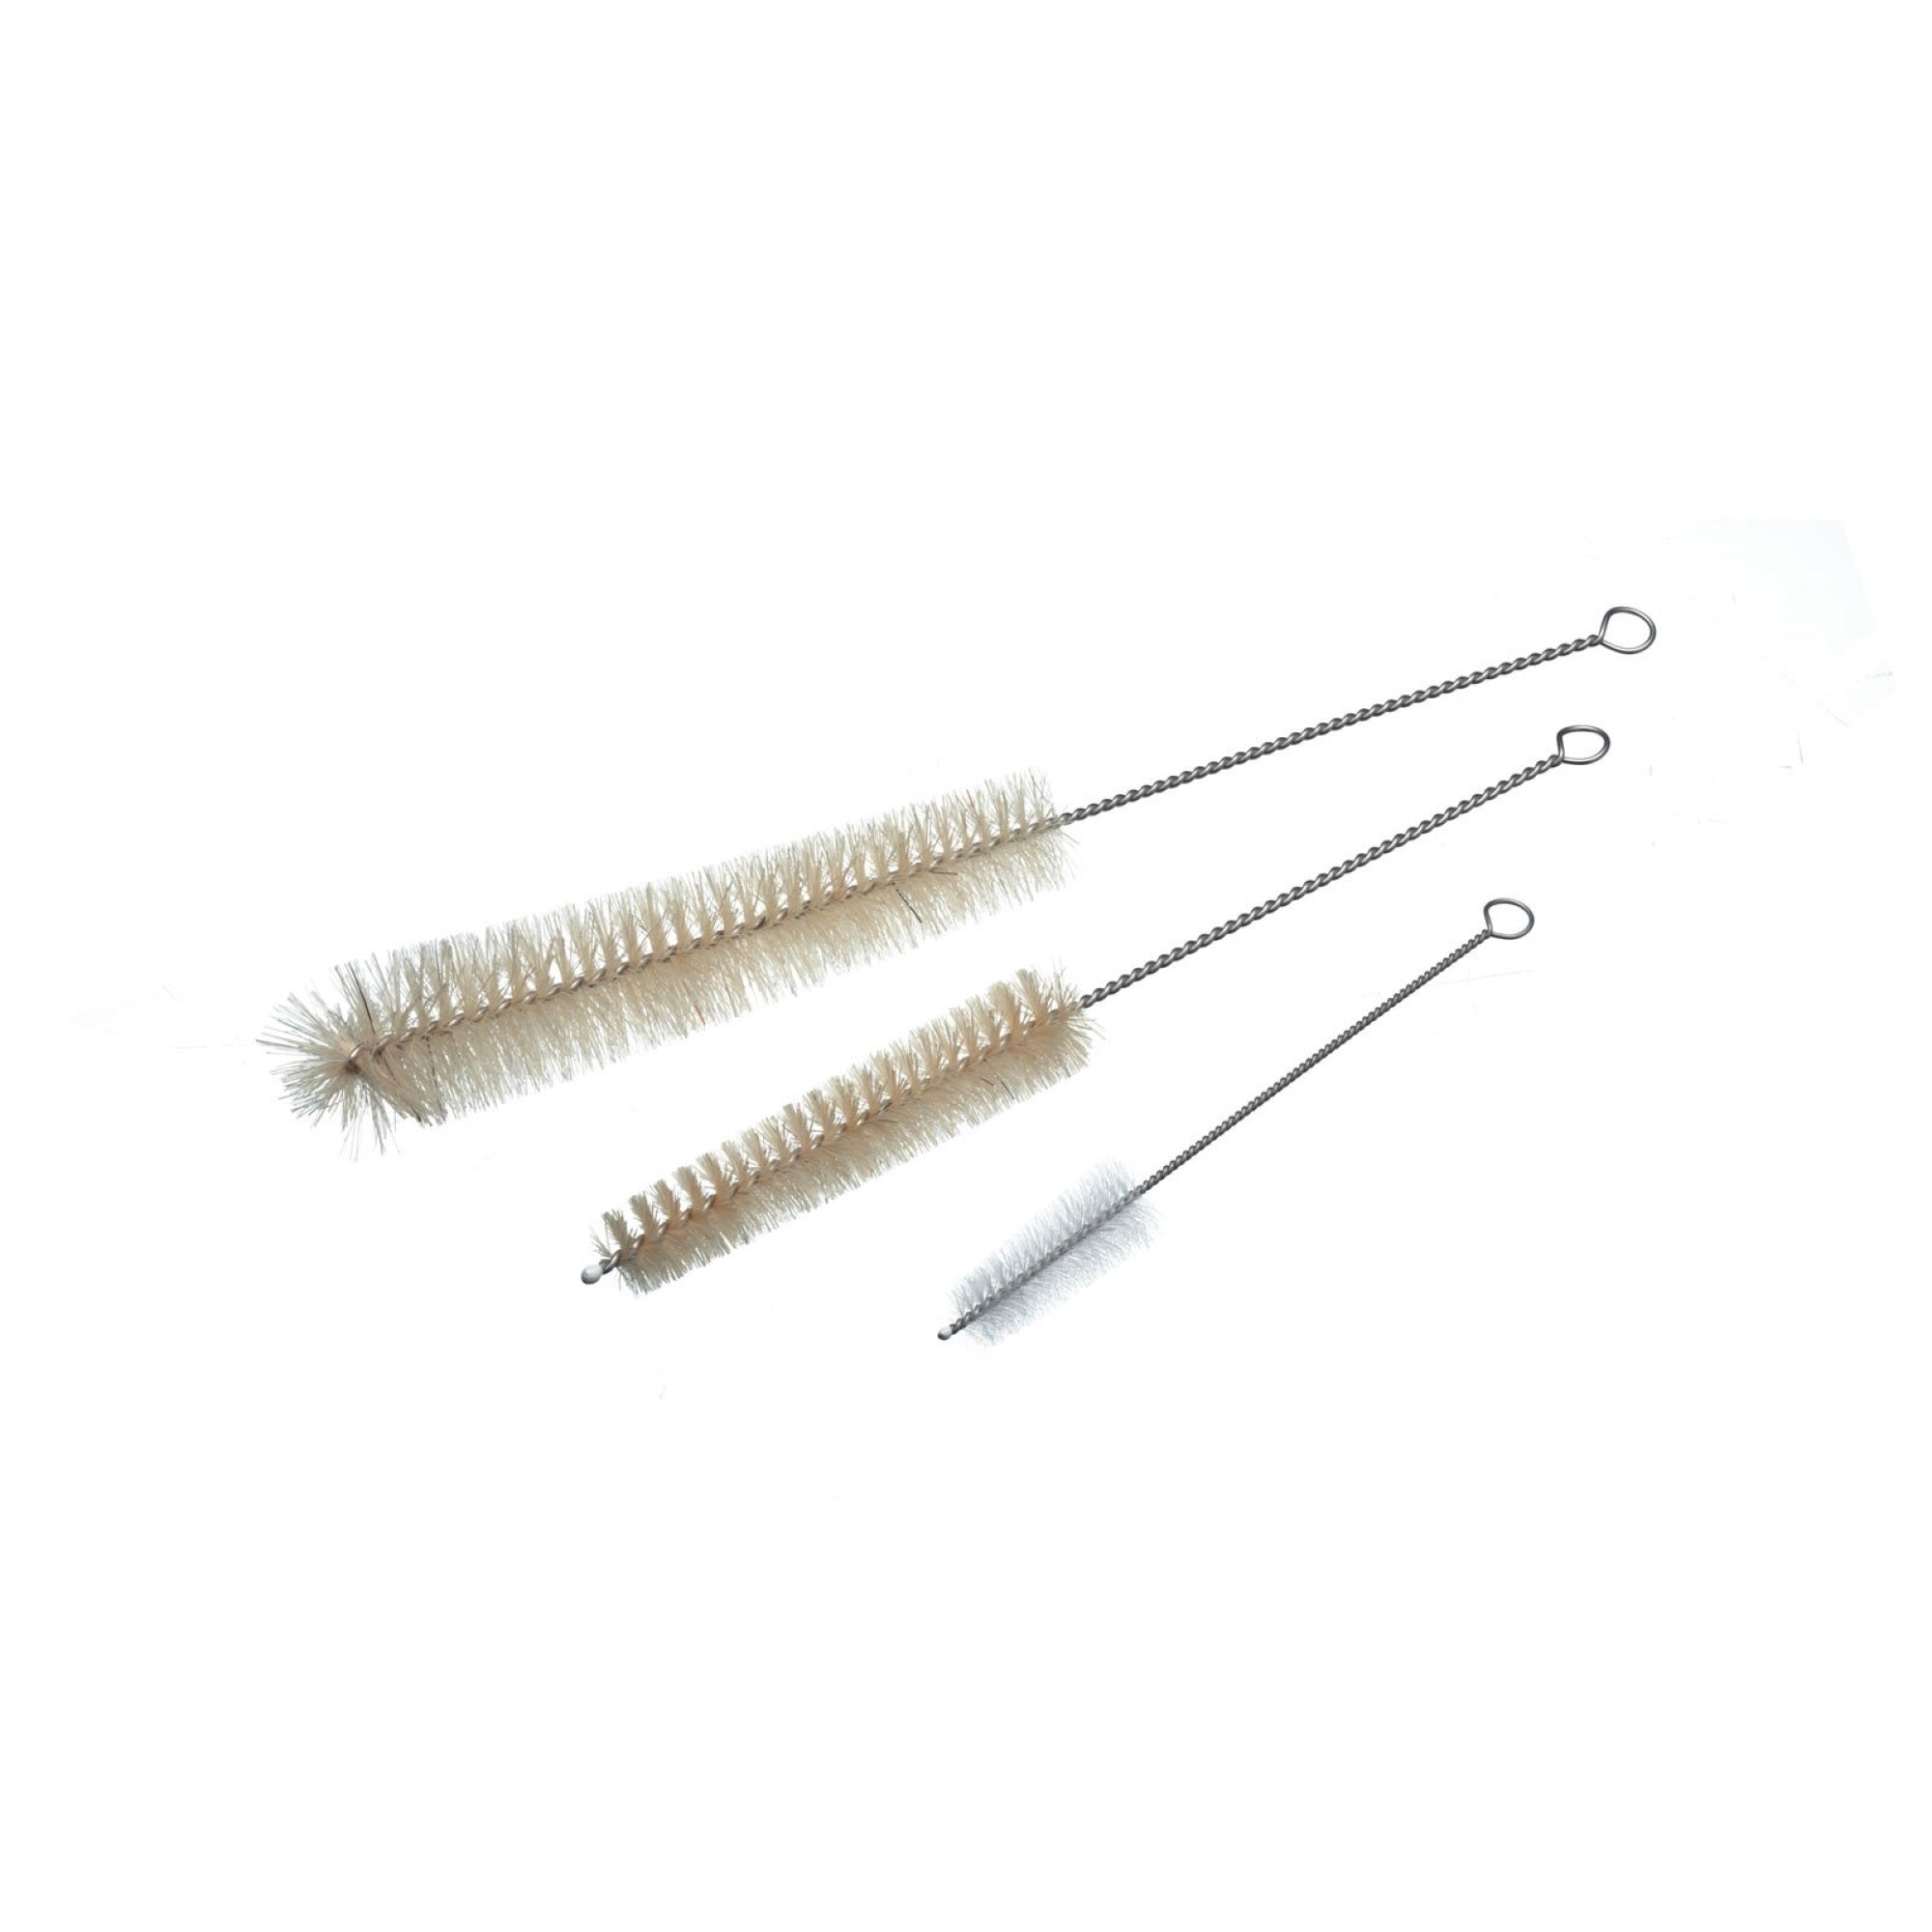 KitchenCraft Set of 3 Bottle Cleaning Brushes - The Cooks Cupboard Ltd